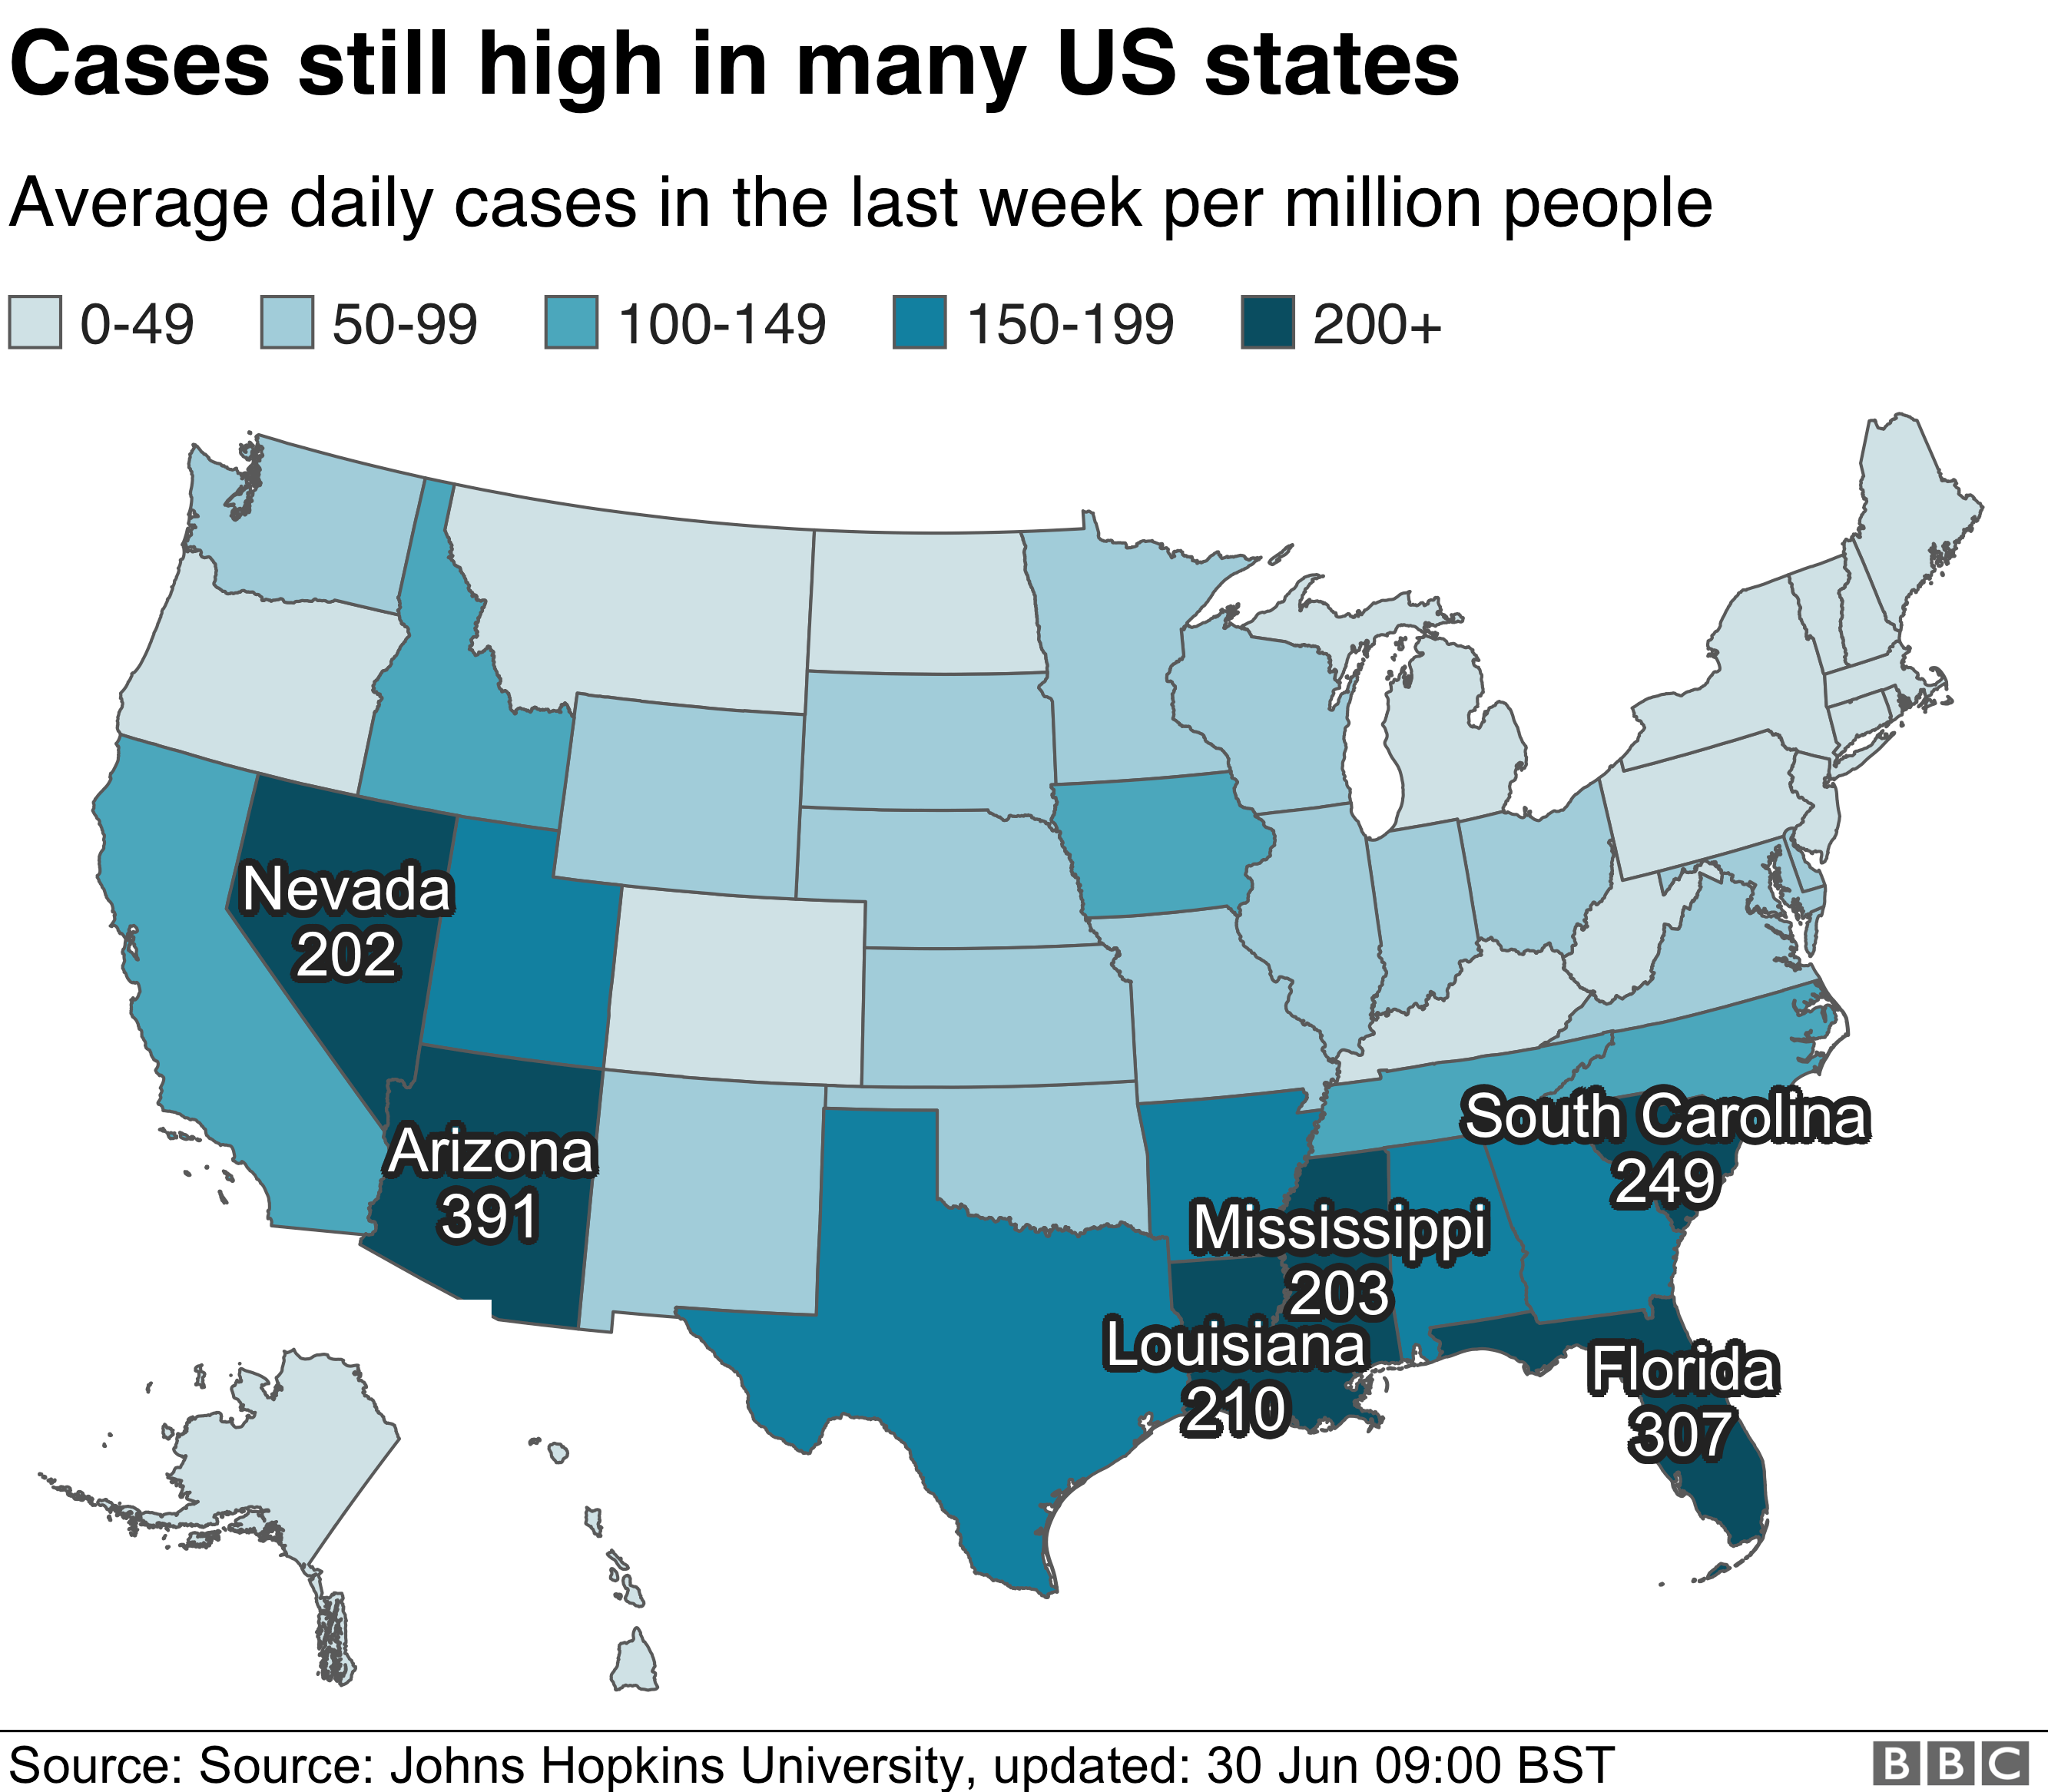 Map of US showing places with increasing cases